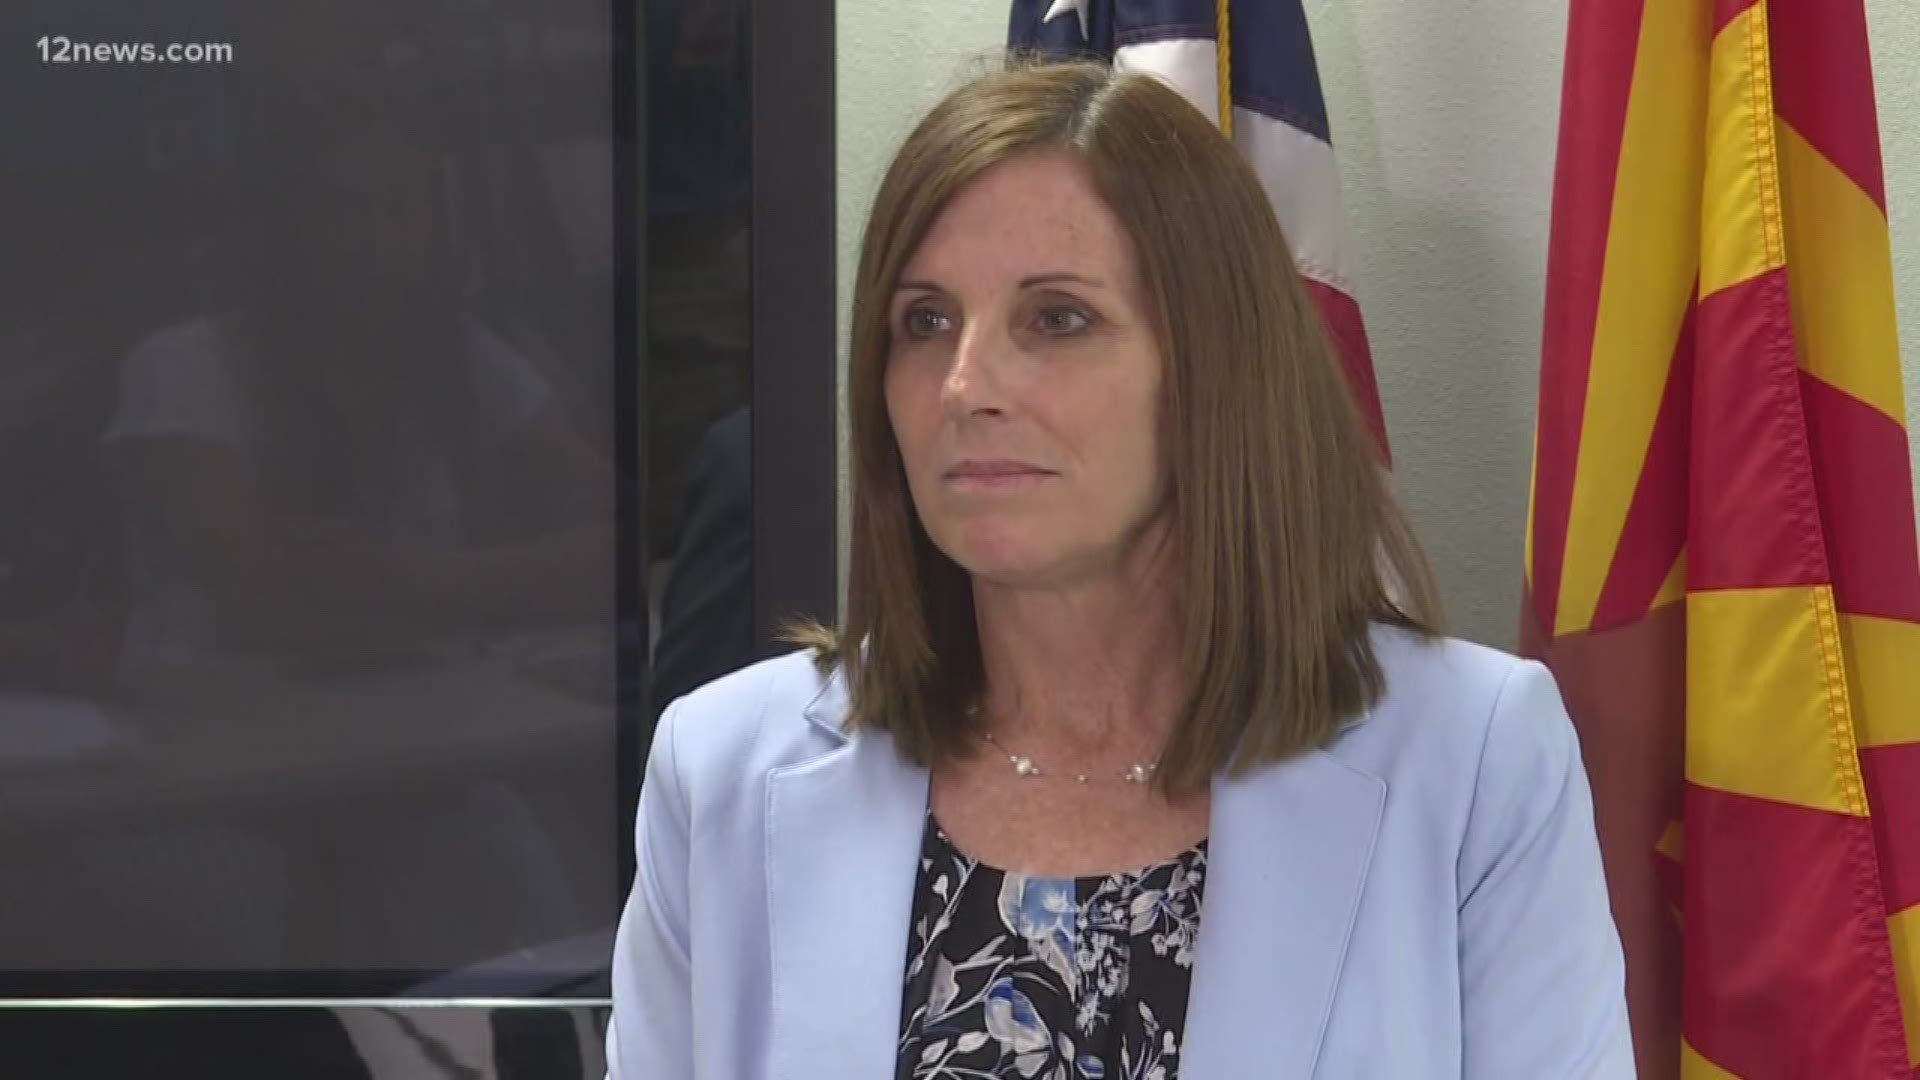 Pro-Publica released a detailed report about a private Border Patrol Facebook group with posts mocking migrant deaths. Arizona Senator Martha Mcsally spoke out about the allegations.